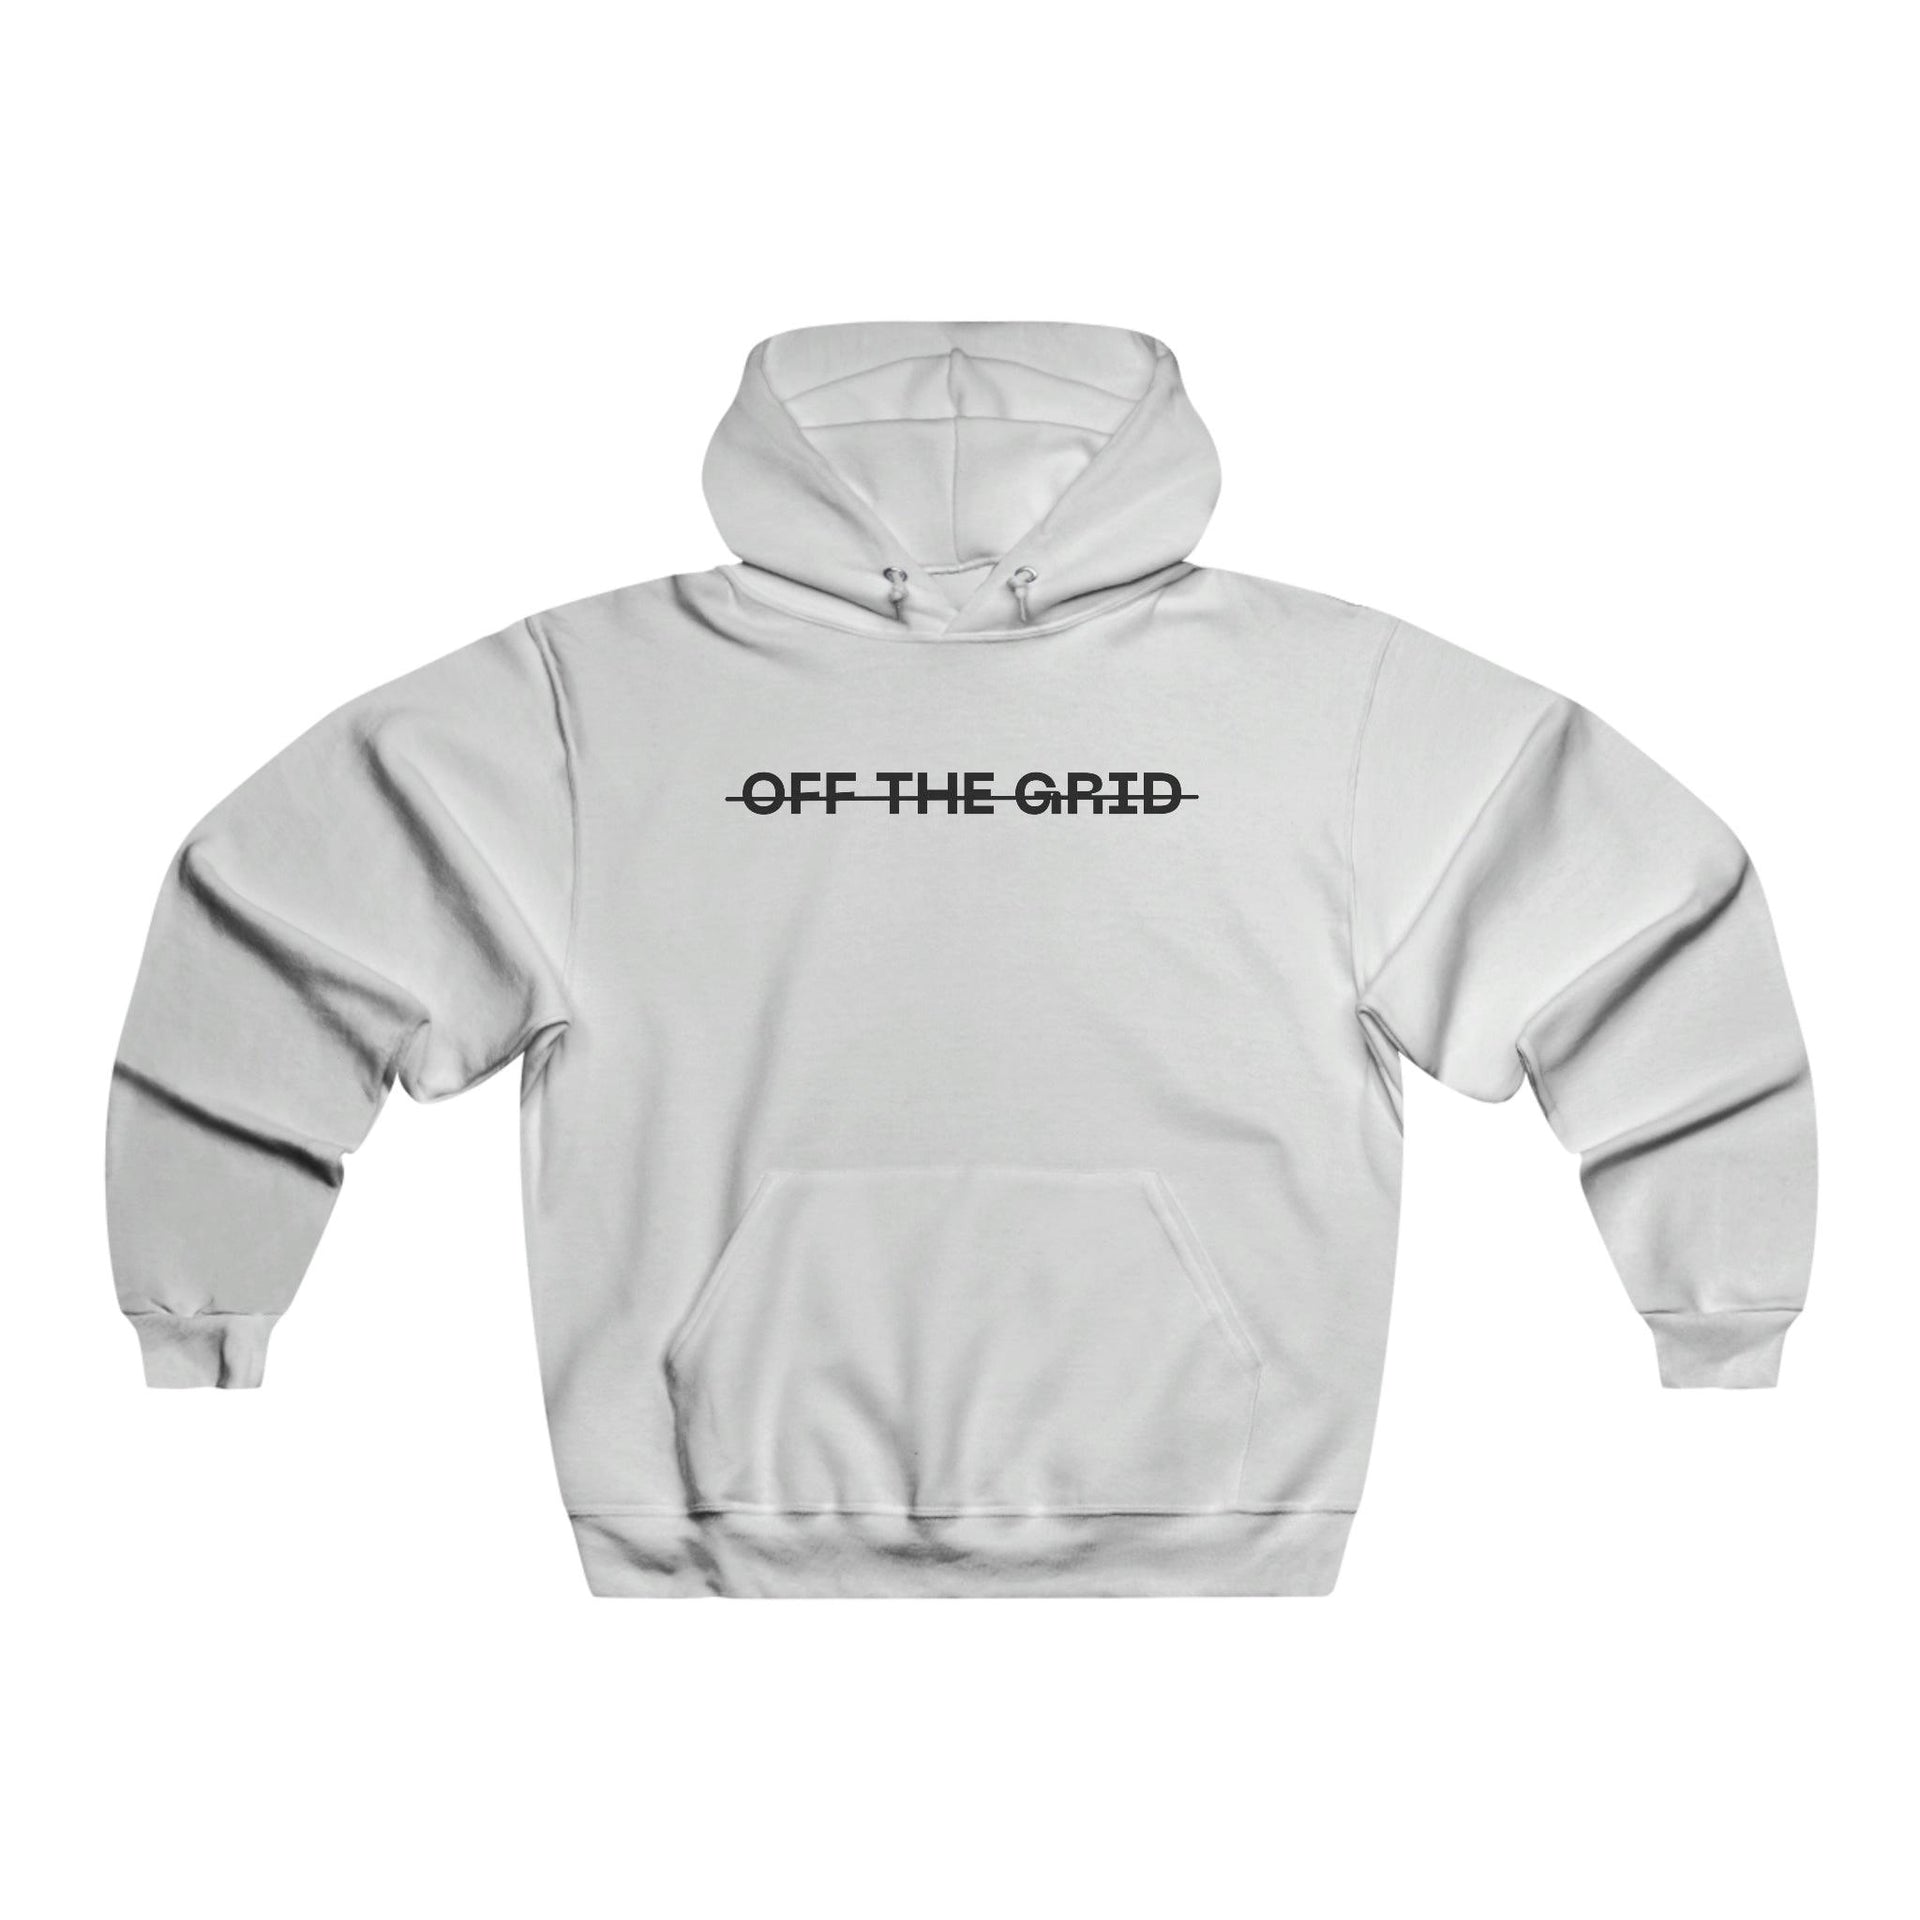 Motivational Clothing - Every Grid Hustler Hoodie in White